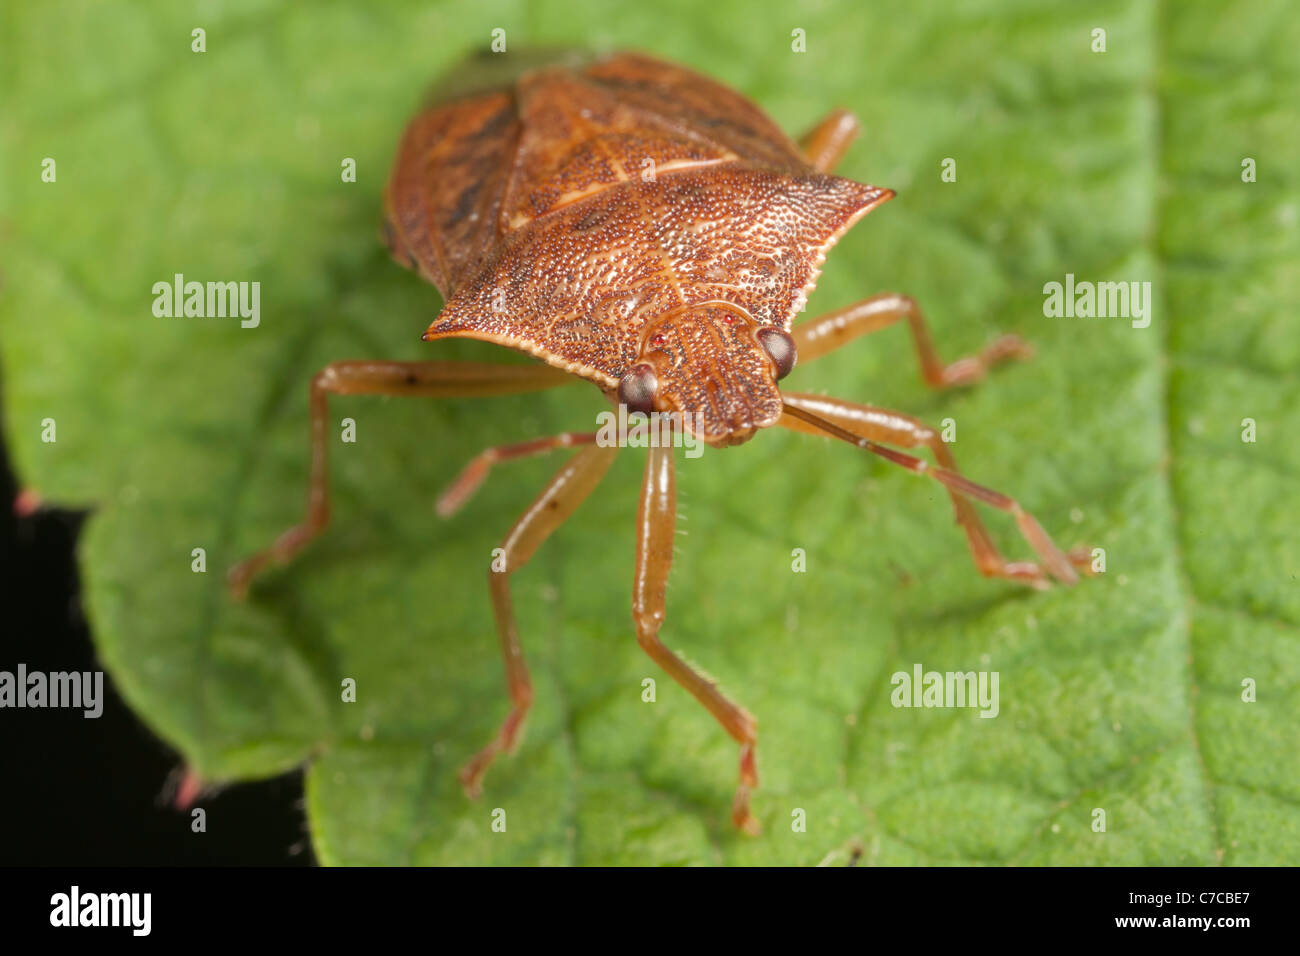 Spined Soldier Bug (Podisus maculiventris) Foto Stock